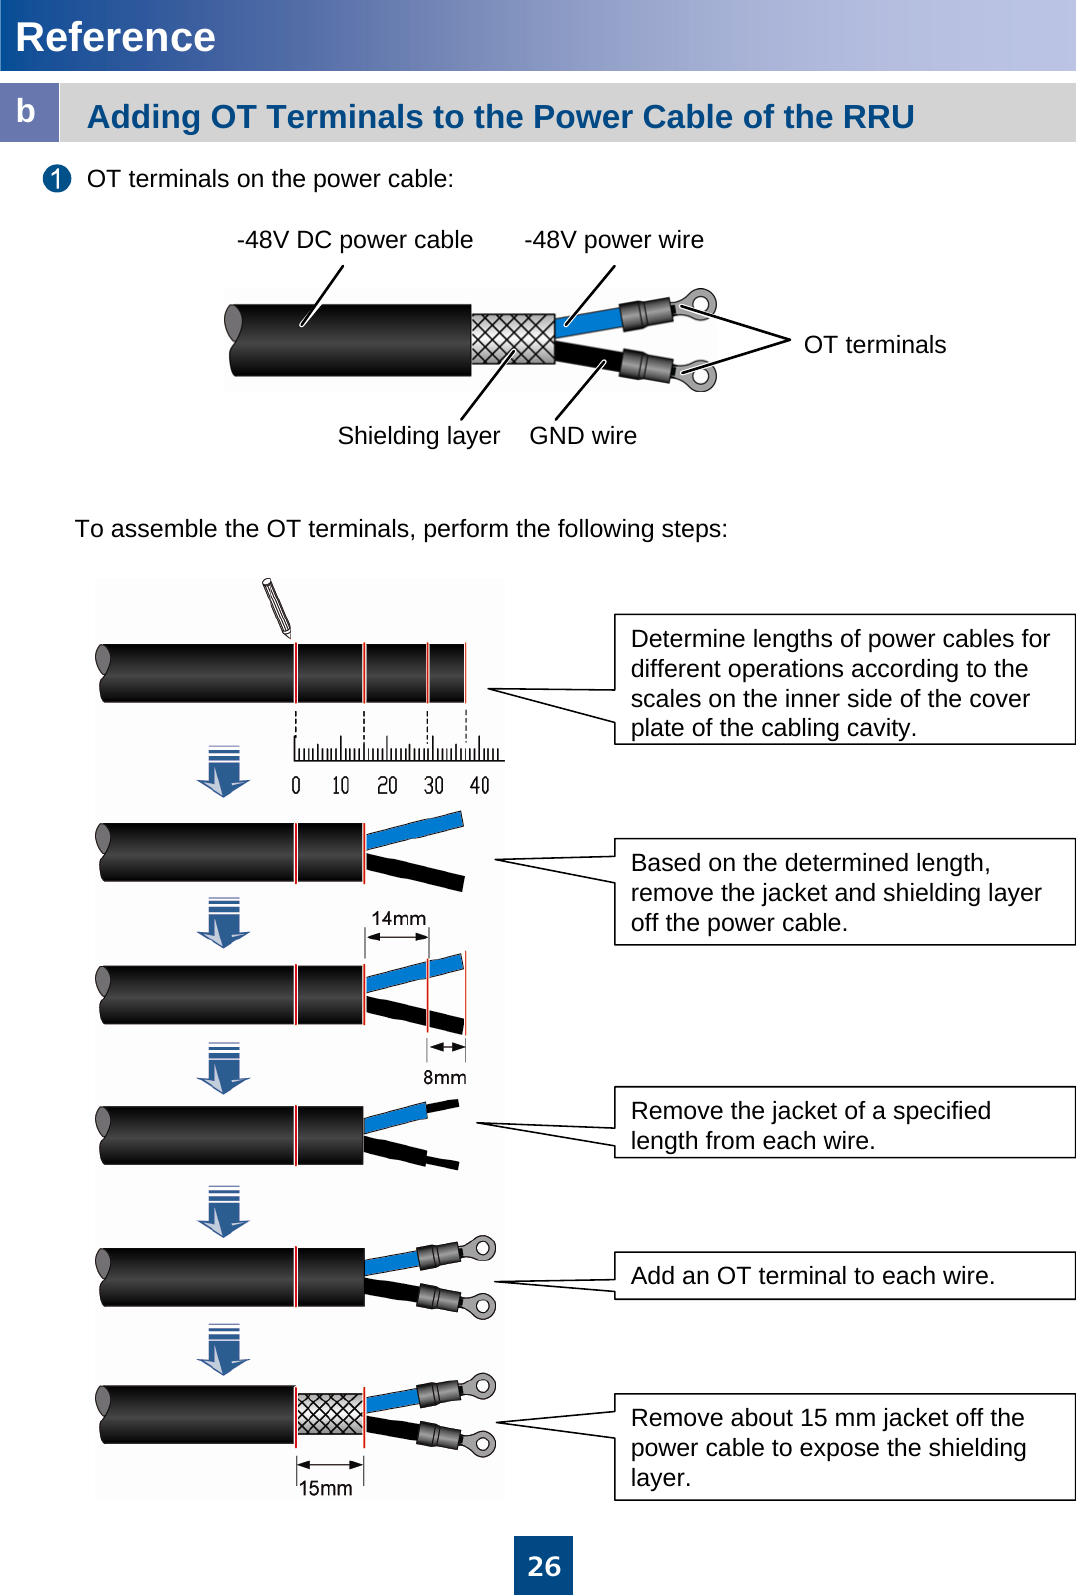 ReferenceOT terminals on the power cable:To assemble the OT terminals, perform the following steps:Adding OT Terminals to the Power Cable of the RRUbDetermine lengths of power cables for different operations according to the scales on the inner side of the cover plate of the cabling cavity.Based on the determined length, remove the jacket and shielding layer off the power cable.Remove the jacket of a specified length from each wire.Add an OT terminal to each wire.Remove about 15 mm jacket off the power cable to expose the shielding layer.26-48V DC power cableShielding layer GND wire-48V power wireOT terminals